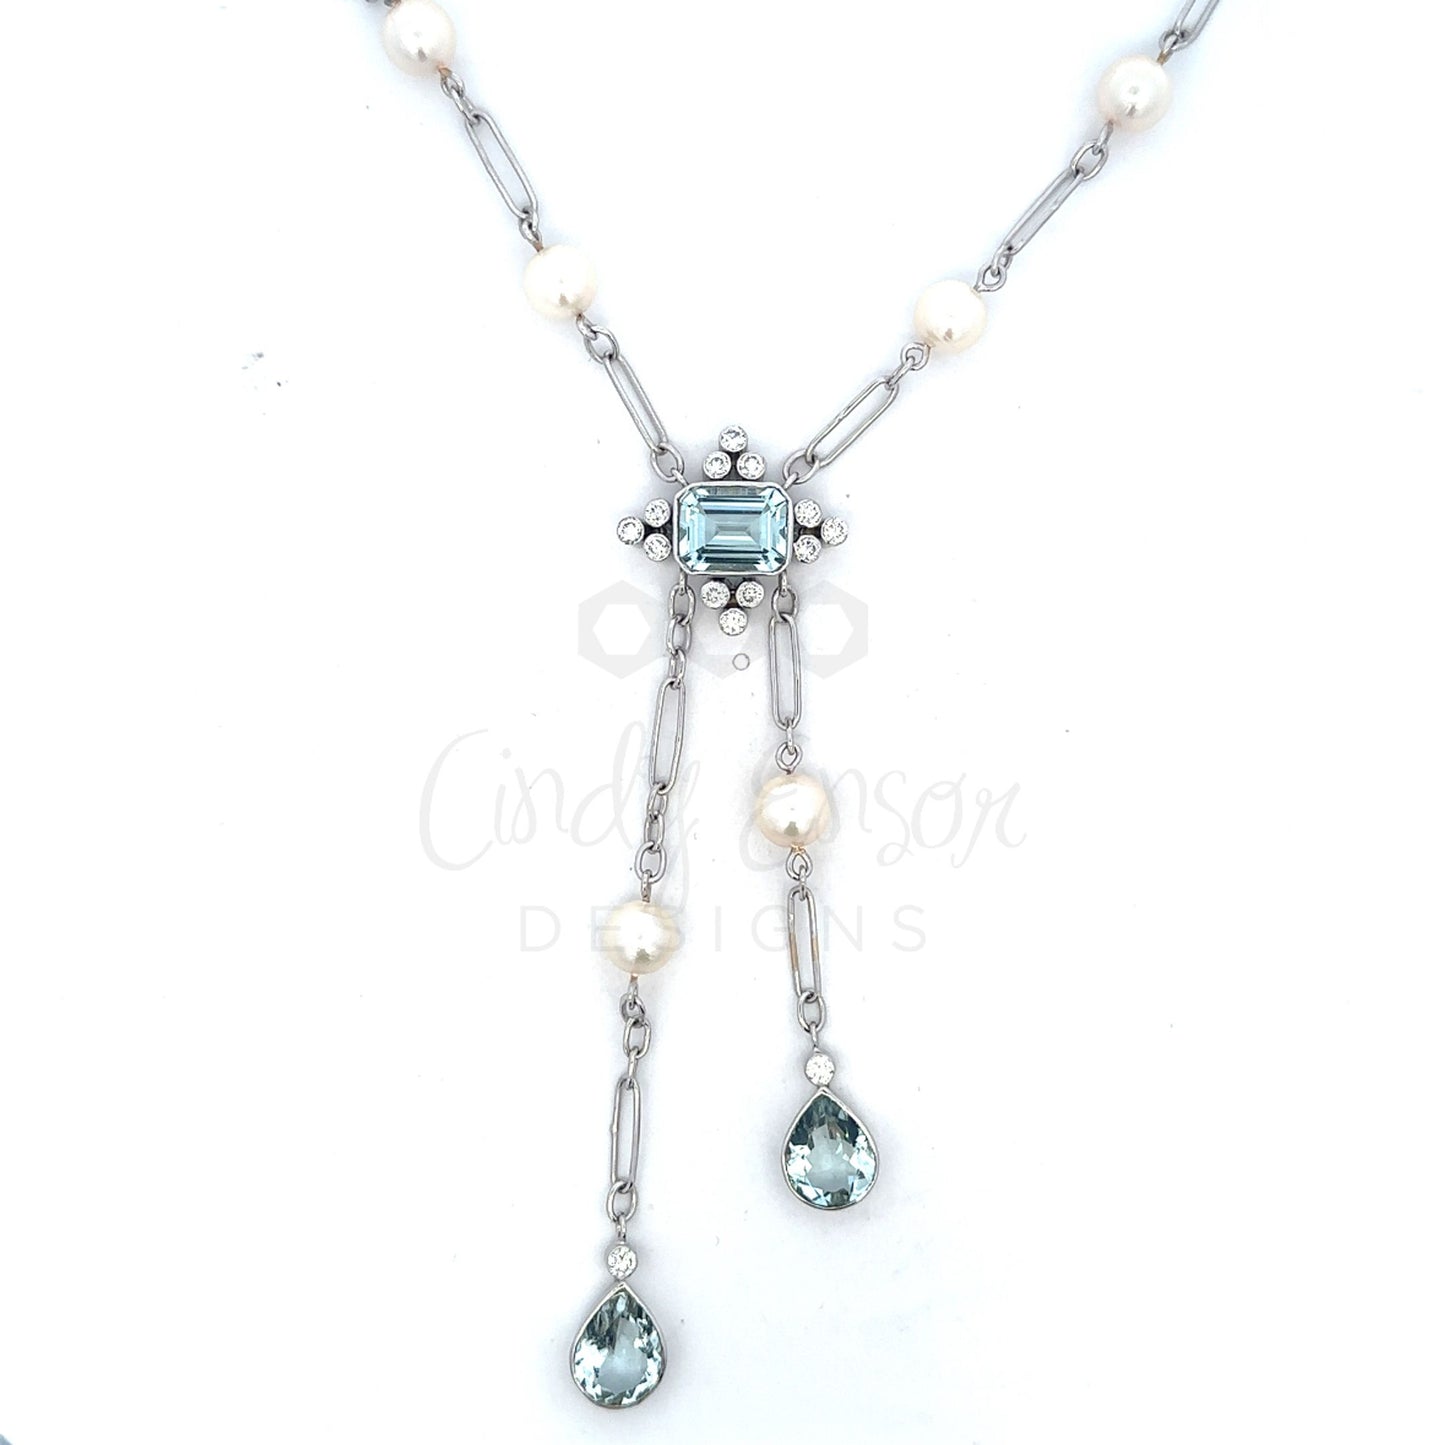 18kt White Gold Necklace with Aquamarine, Pearl, and Diamonds